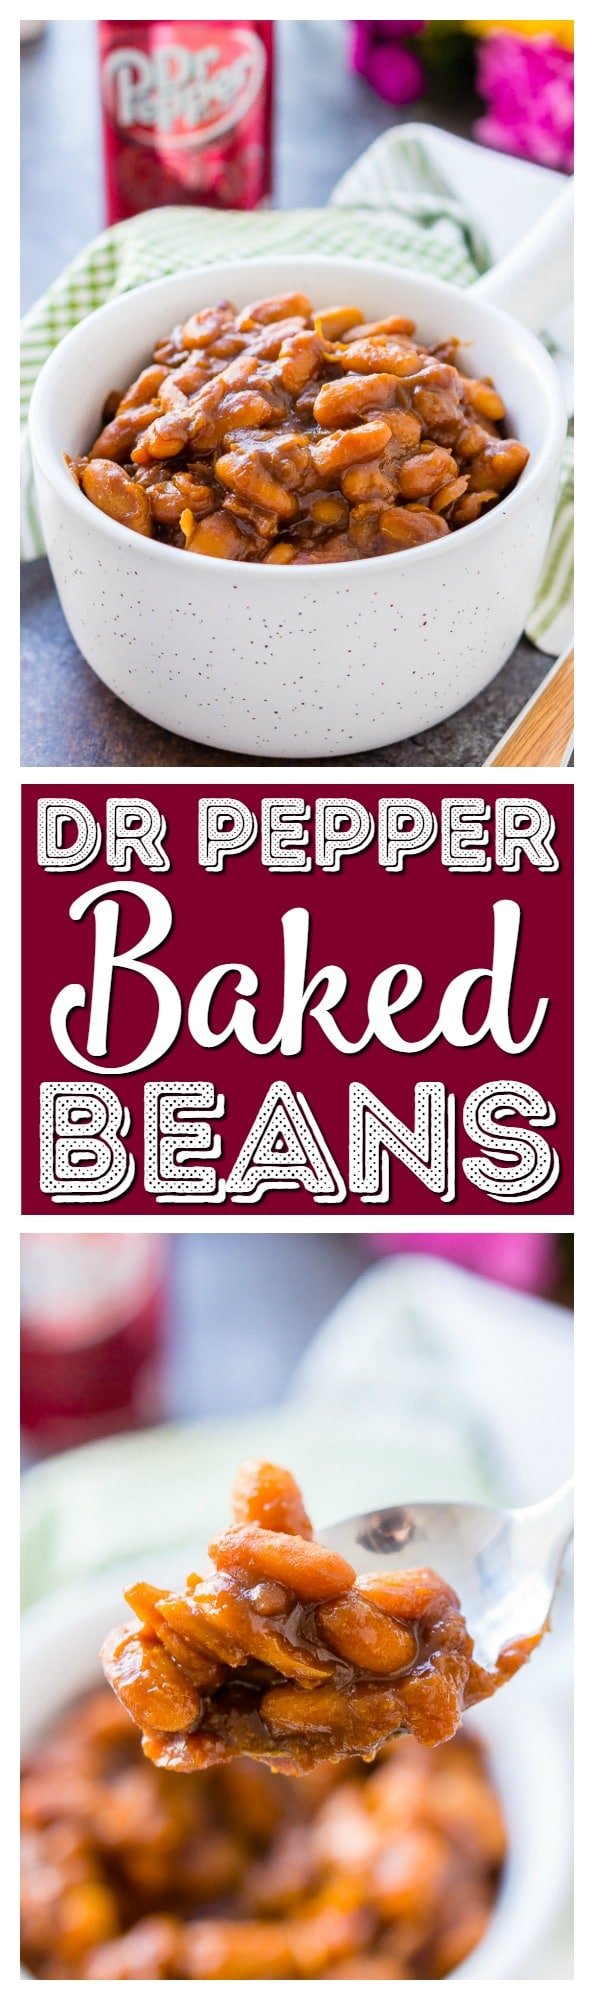 These Dr Pepper Baked Beans are a sweet and delicious side dish that's ready in less than an hour! Perfect for BBQ's and game day parties! via @sugarandsoulco